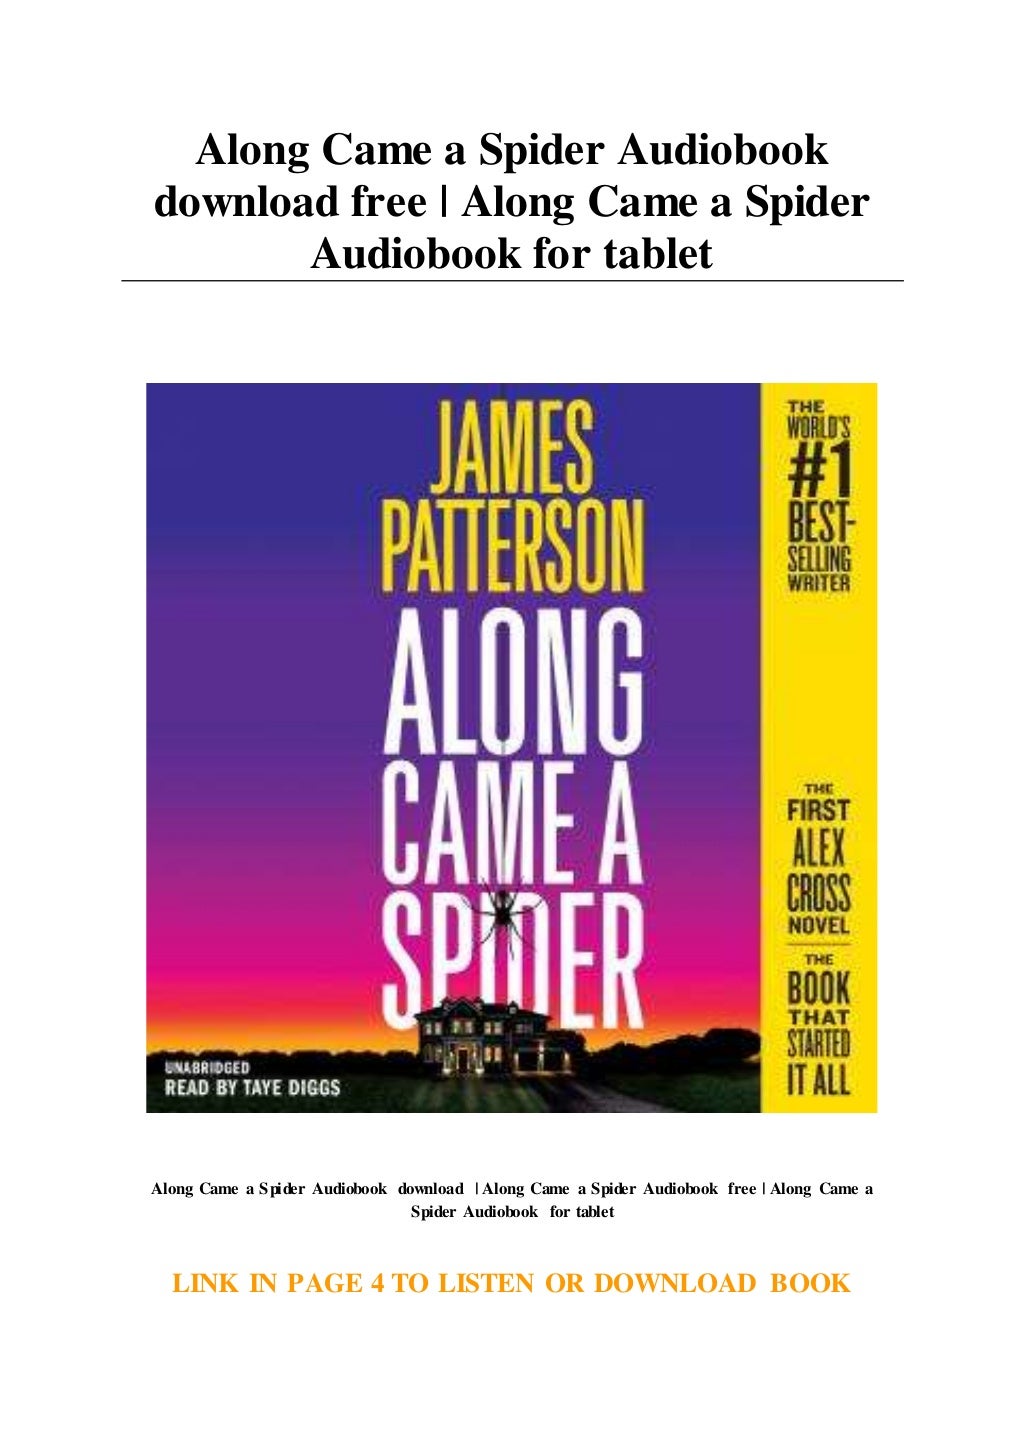 along came a spider audiobook free download